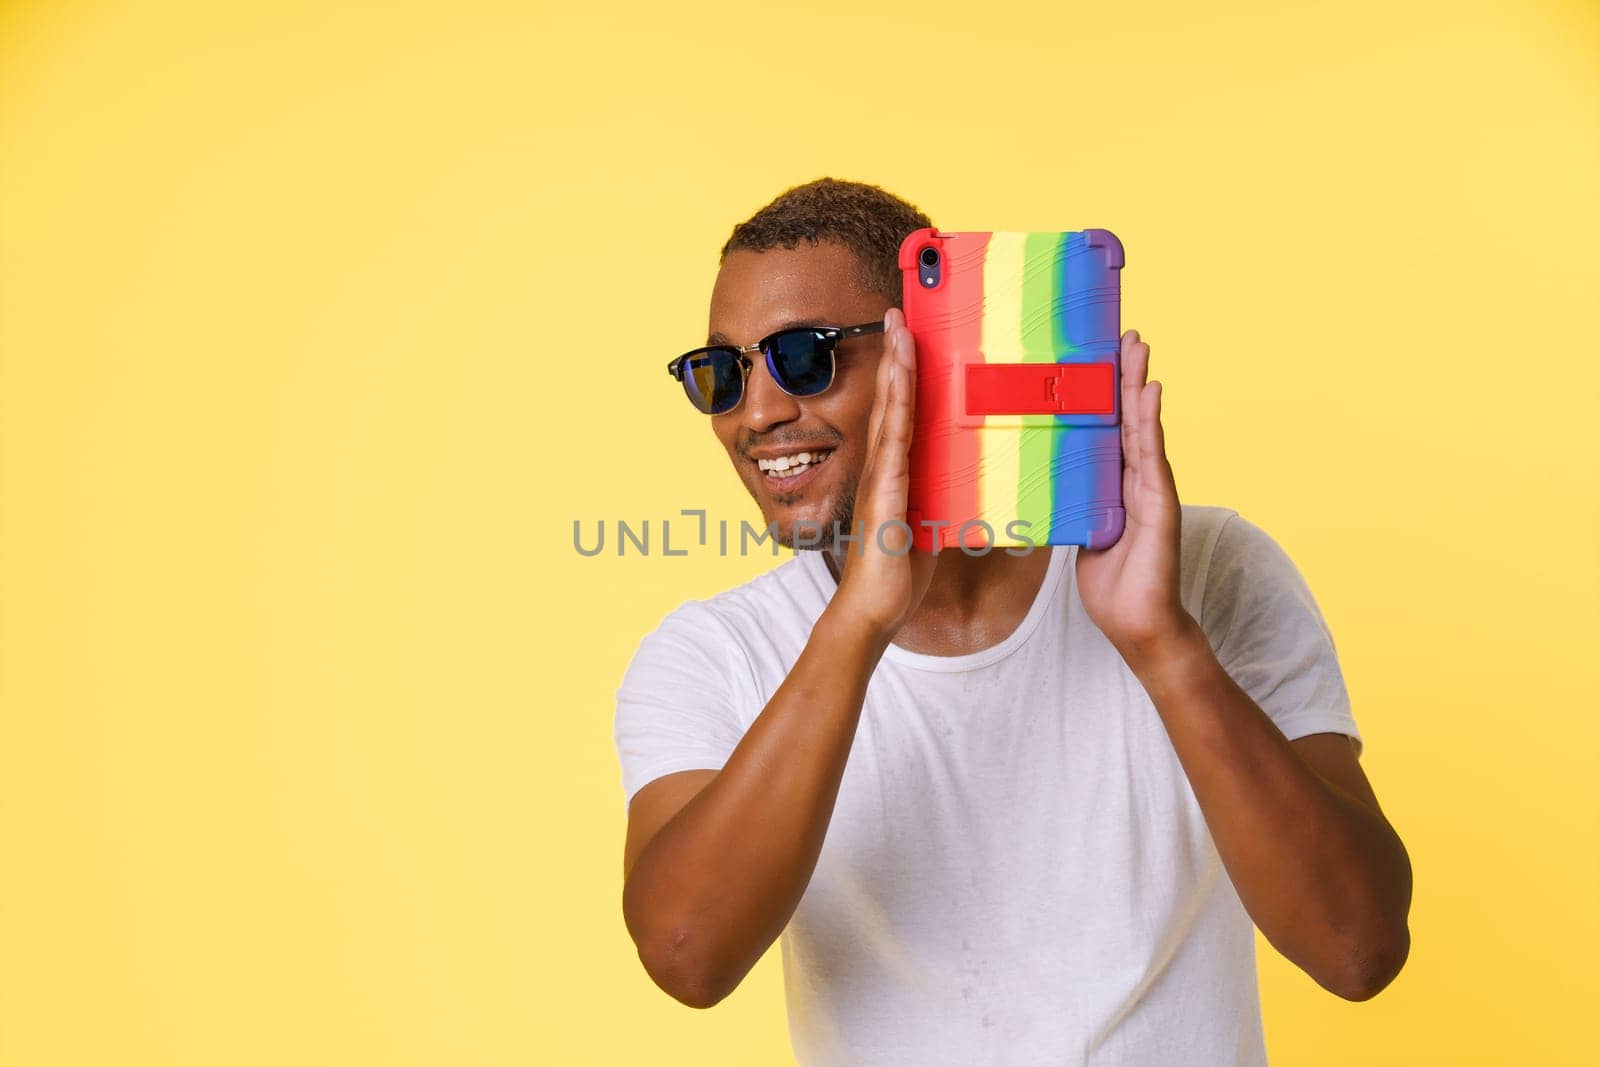 With smile on face, young African American man uses Tablet PC to share truth and come out as gay. Yellow background and ample copy space for LGBT community or concepts of bravery and self-expression. High quality photo